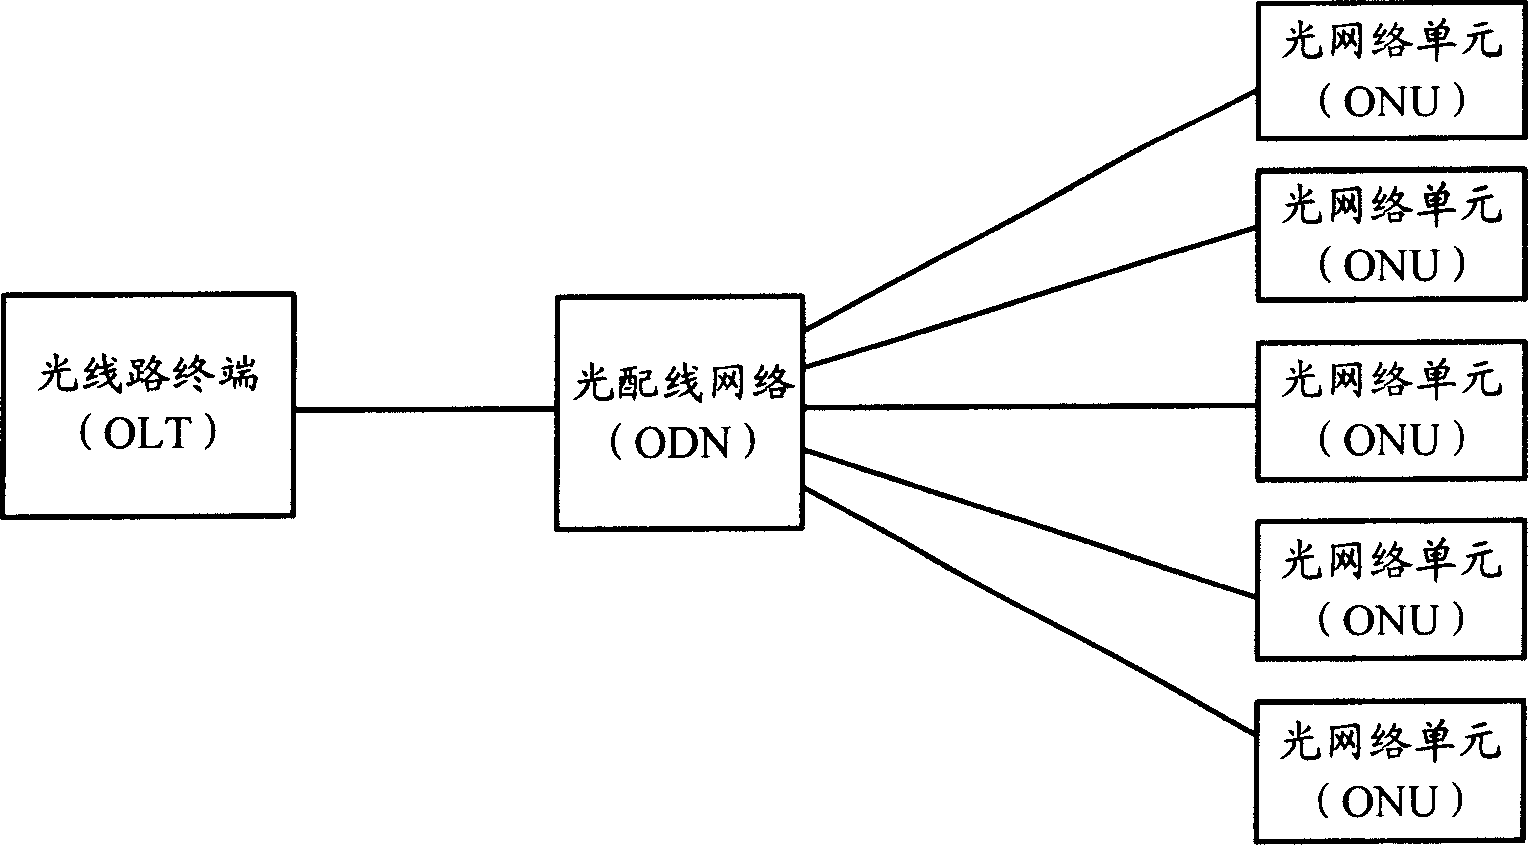 Optical splitter and passive optical network loop system